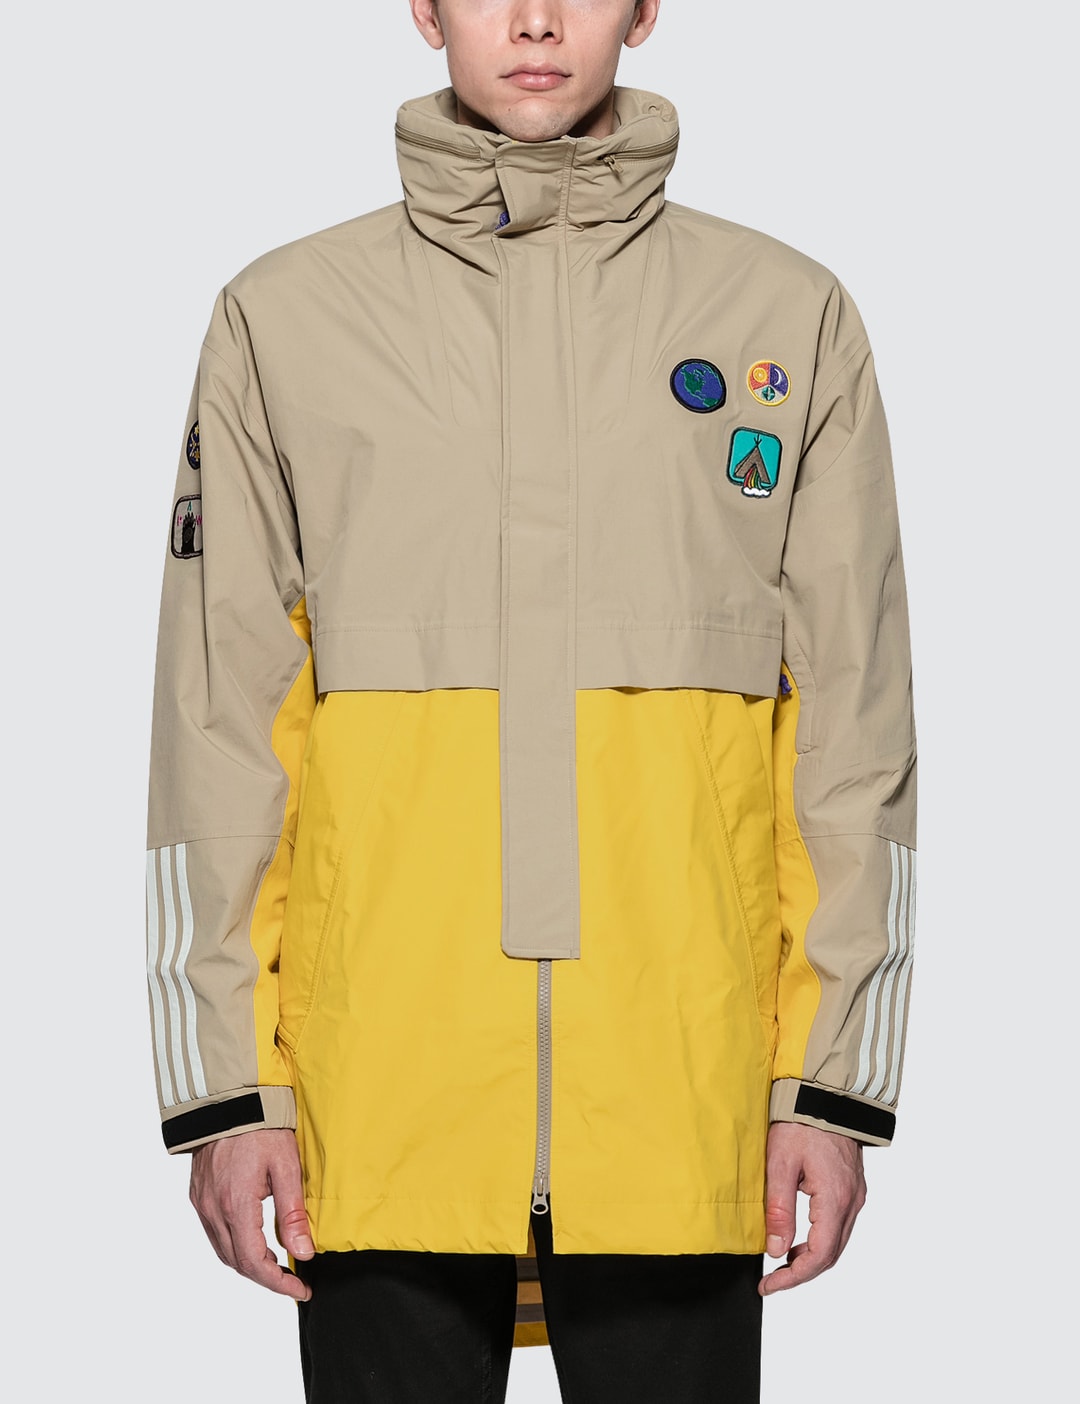 Adidas Originals - Pharrell x Adidas Human Hiking 3L Jacket | - Globally Curated and Lifestyle by Hypebeast